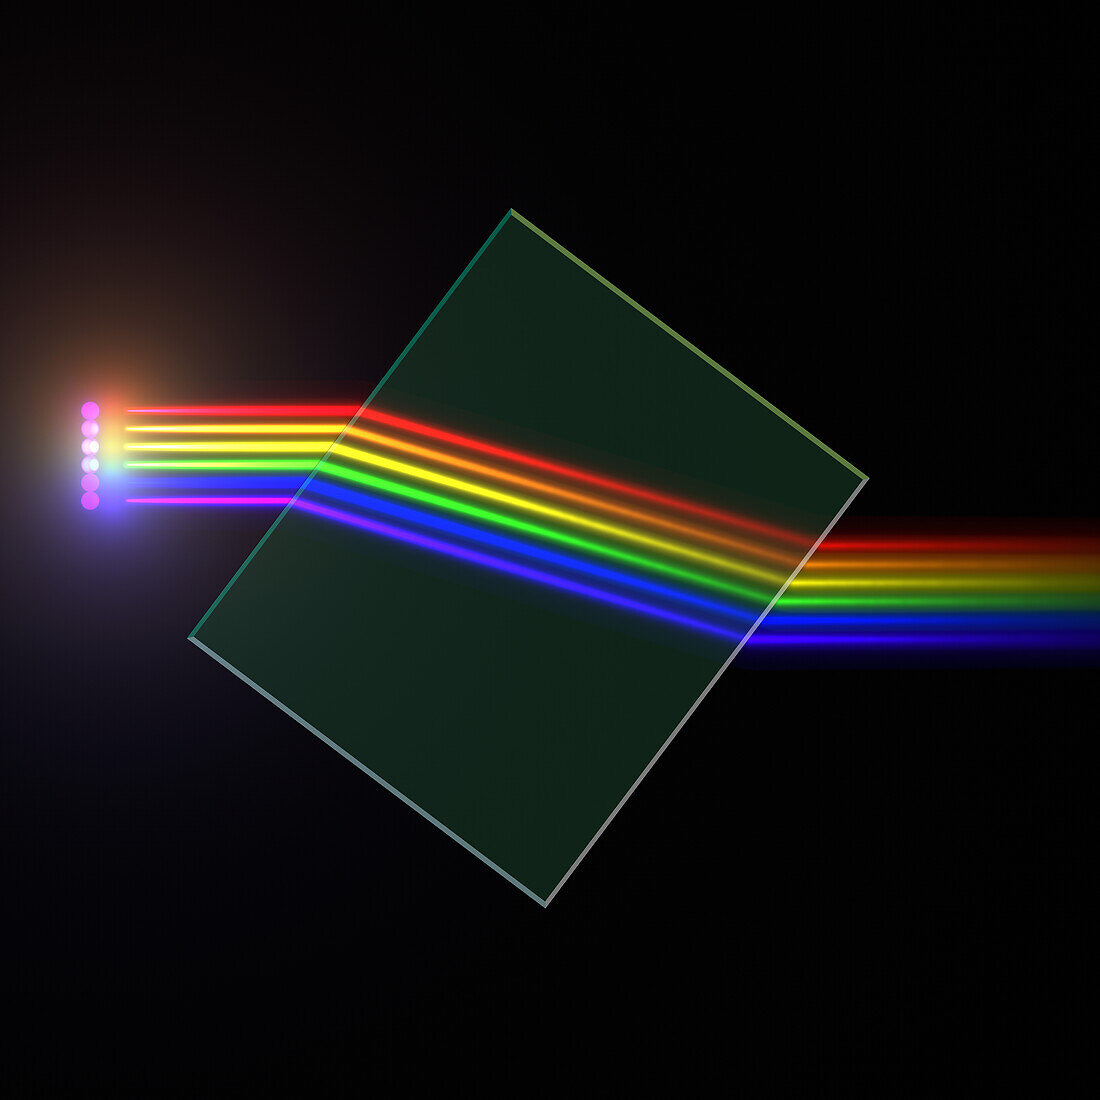 Refraction of incident light rays by glass block, illustration